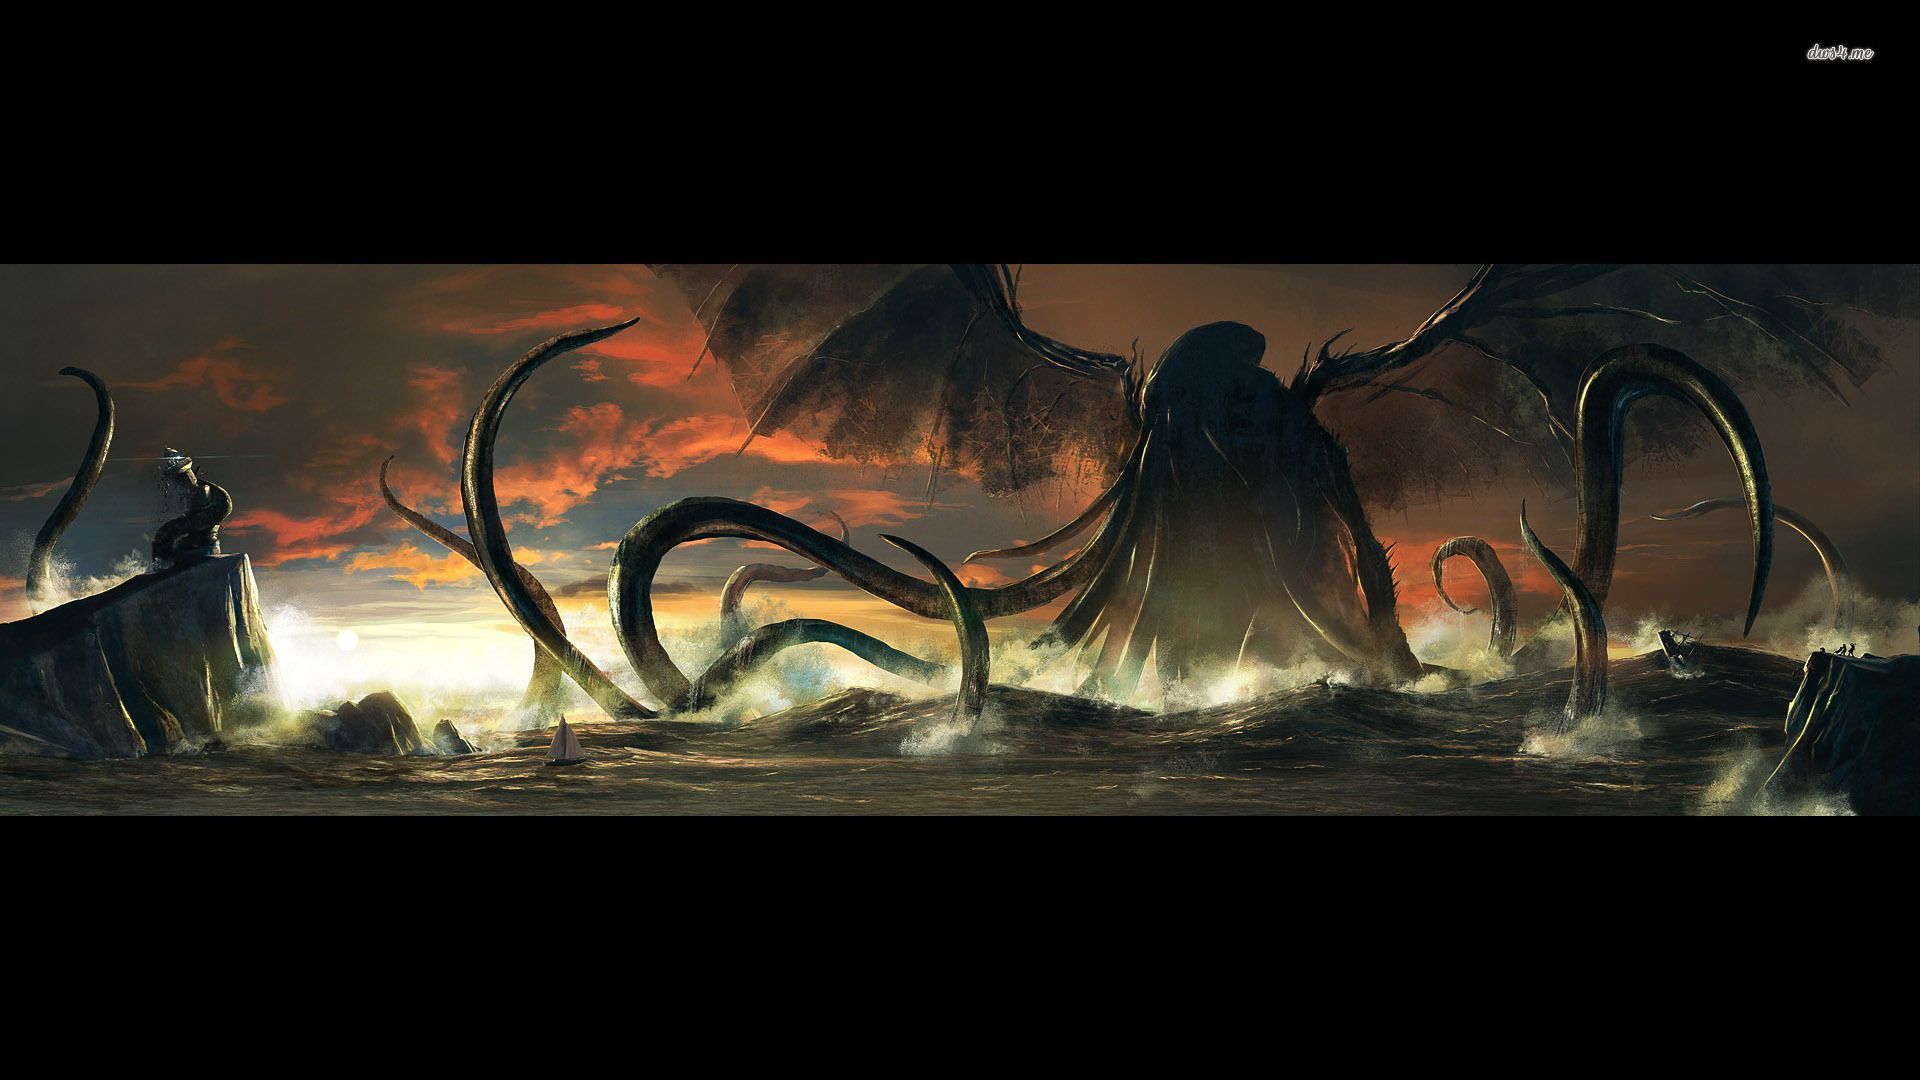 Cthulhu in the ocean wallpaper - Fantasy wallpapers - #18782